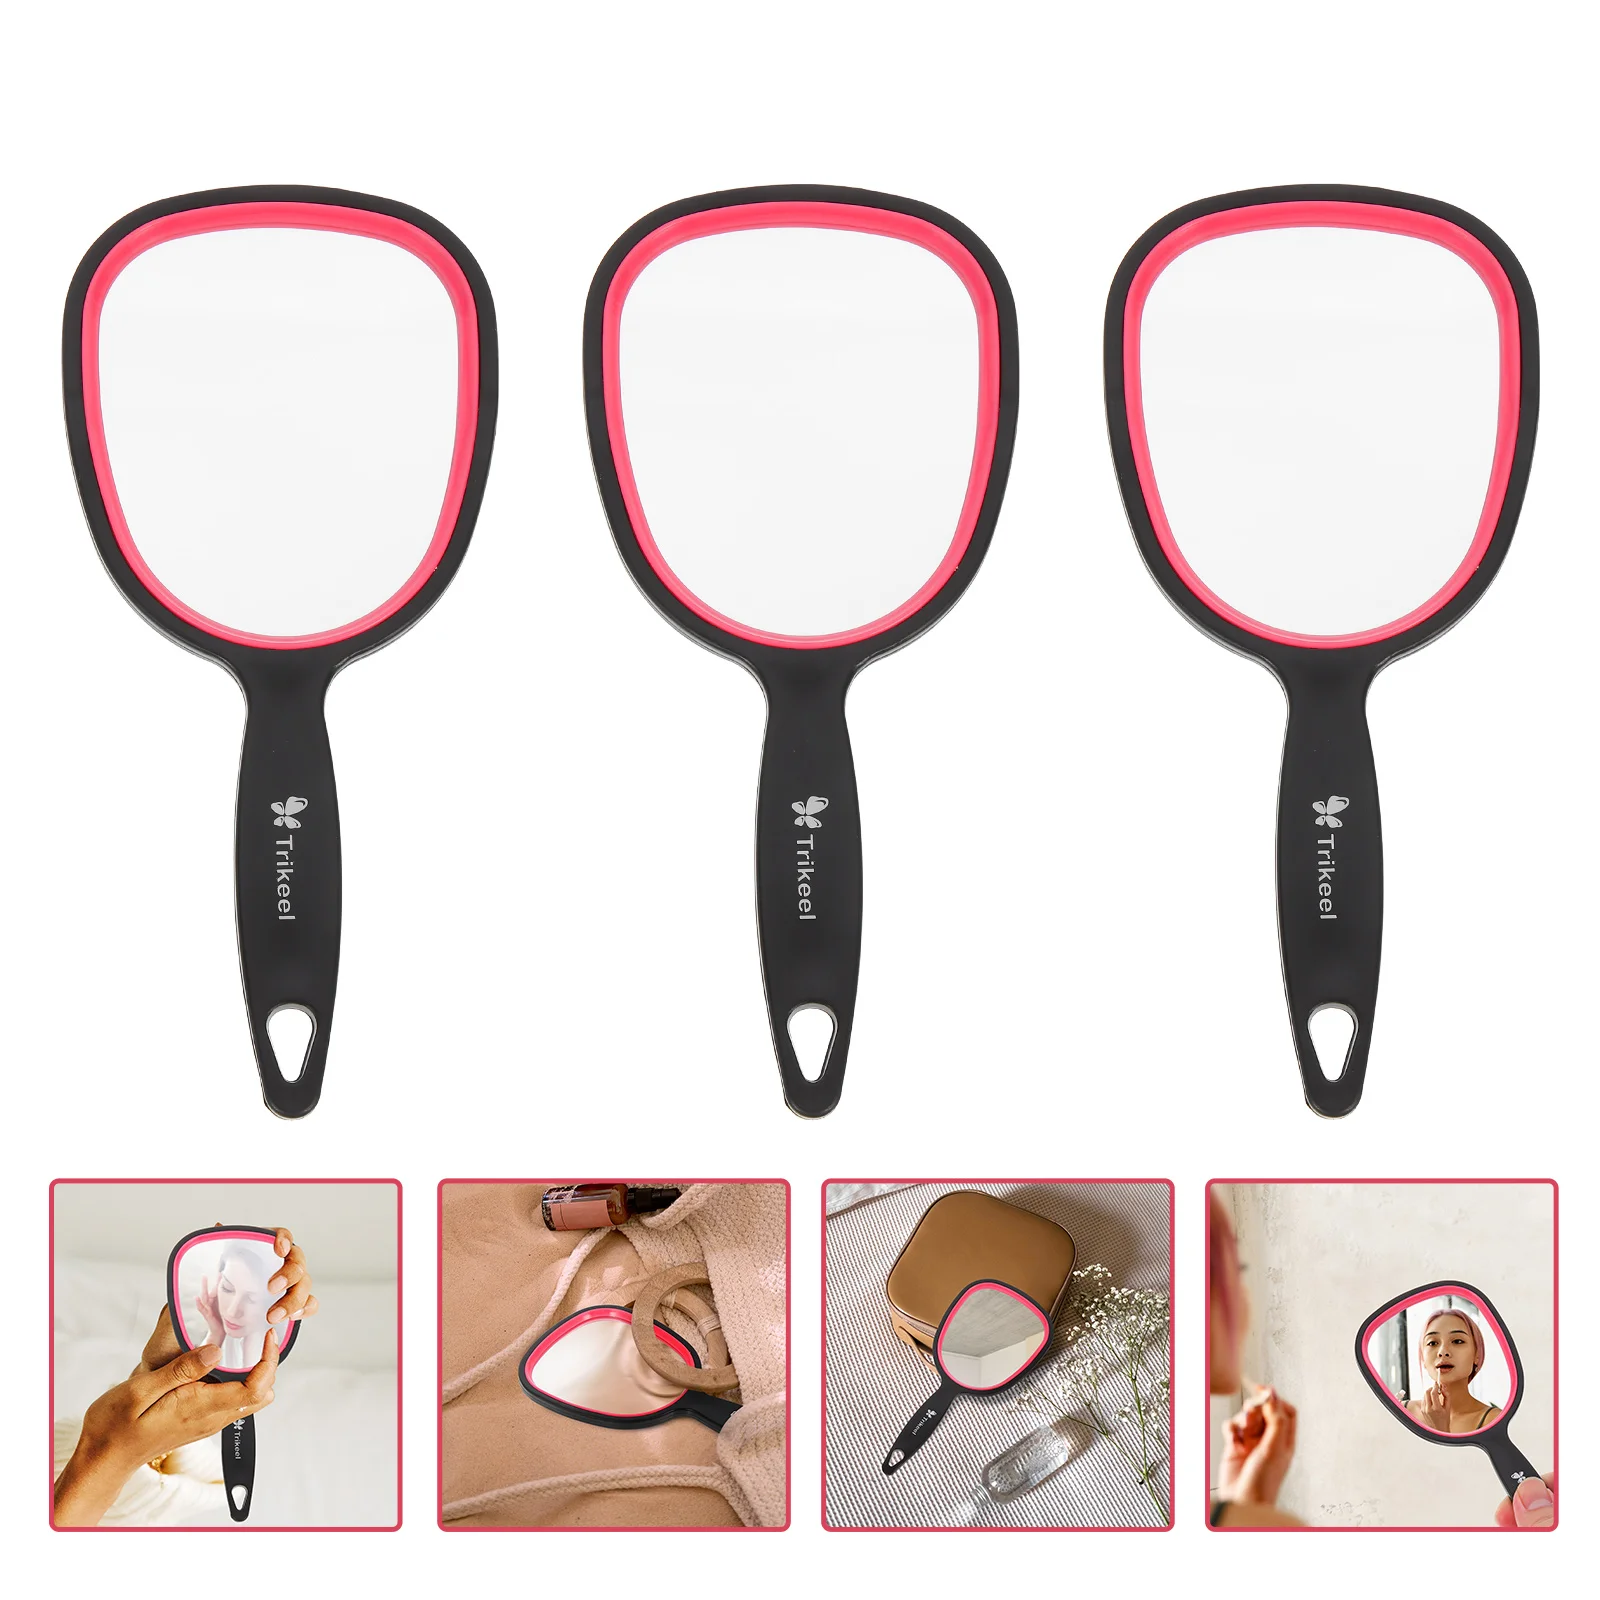 

Mirror Makeup Handheld Portable Lights Vanity Mirrors Magnifying Lighted Hand Compact Kit Full Body Supplies Girl Travel Mini